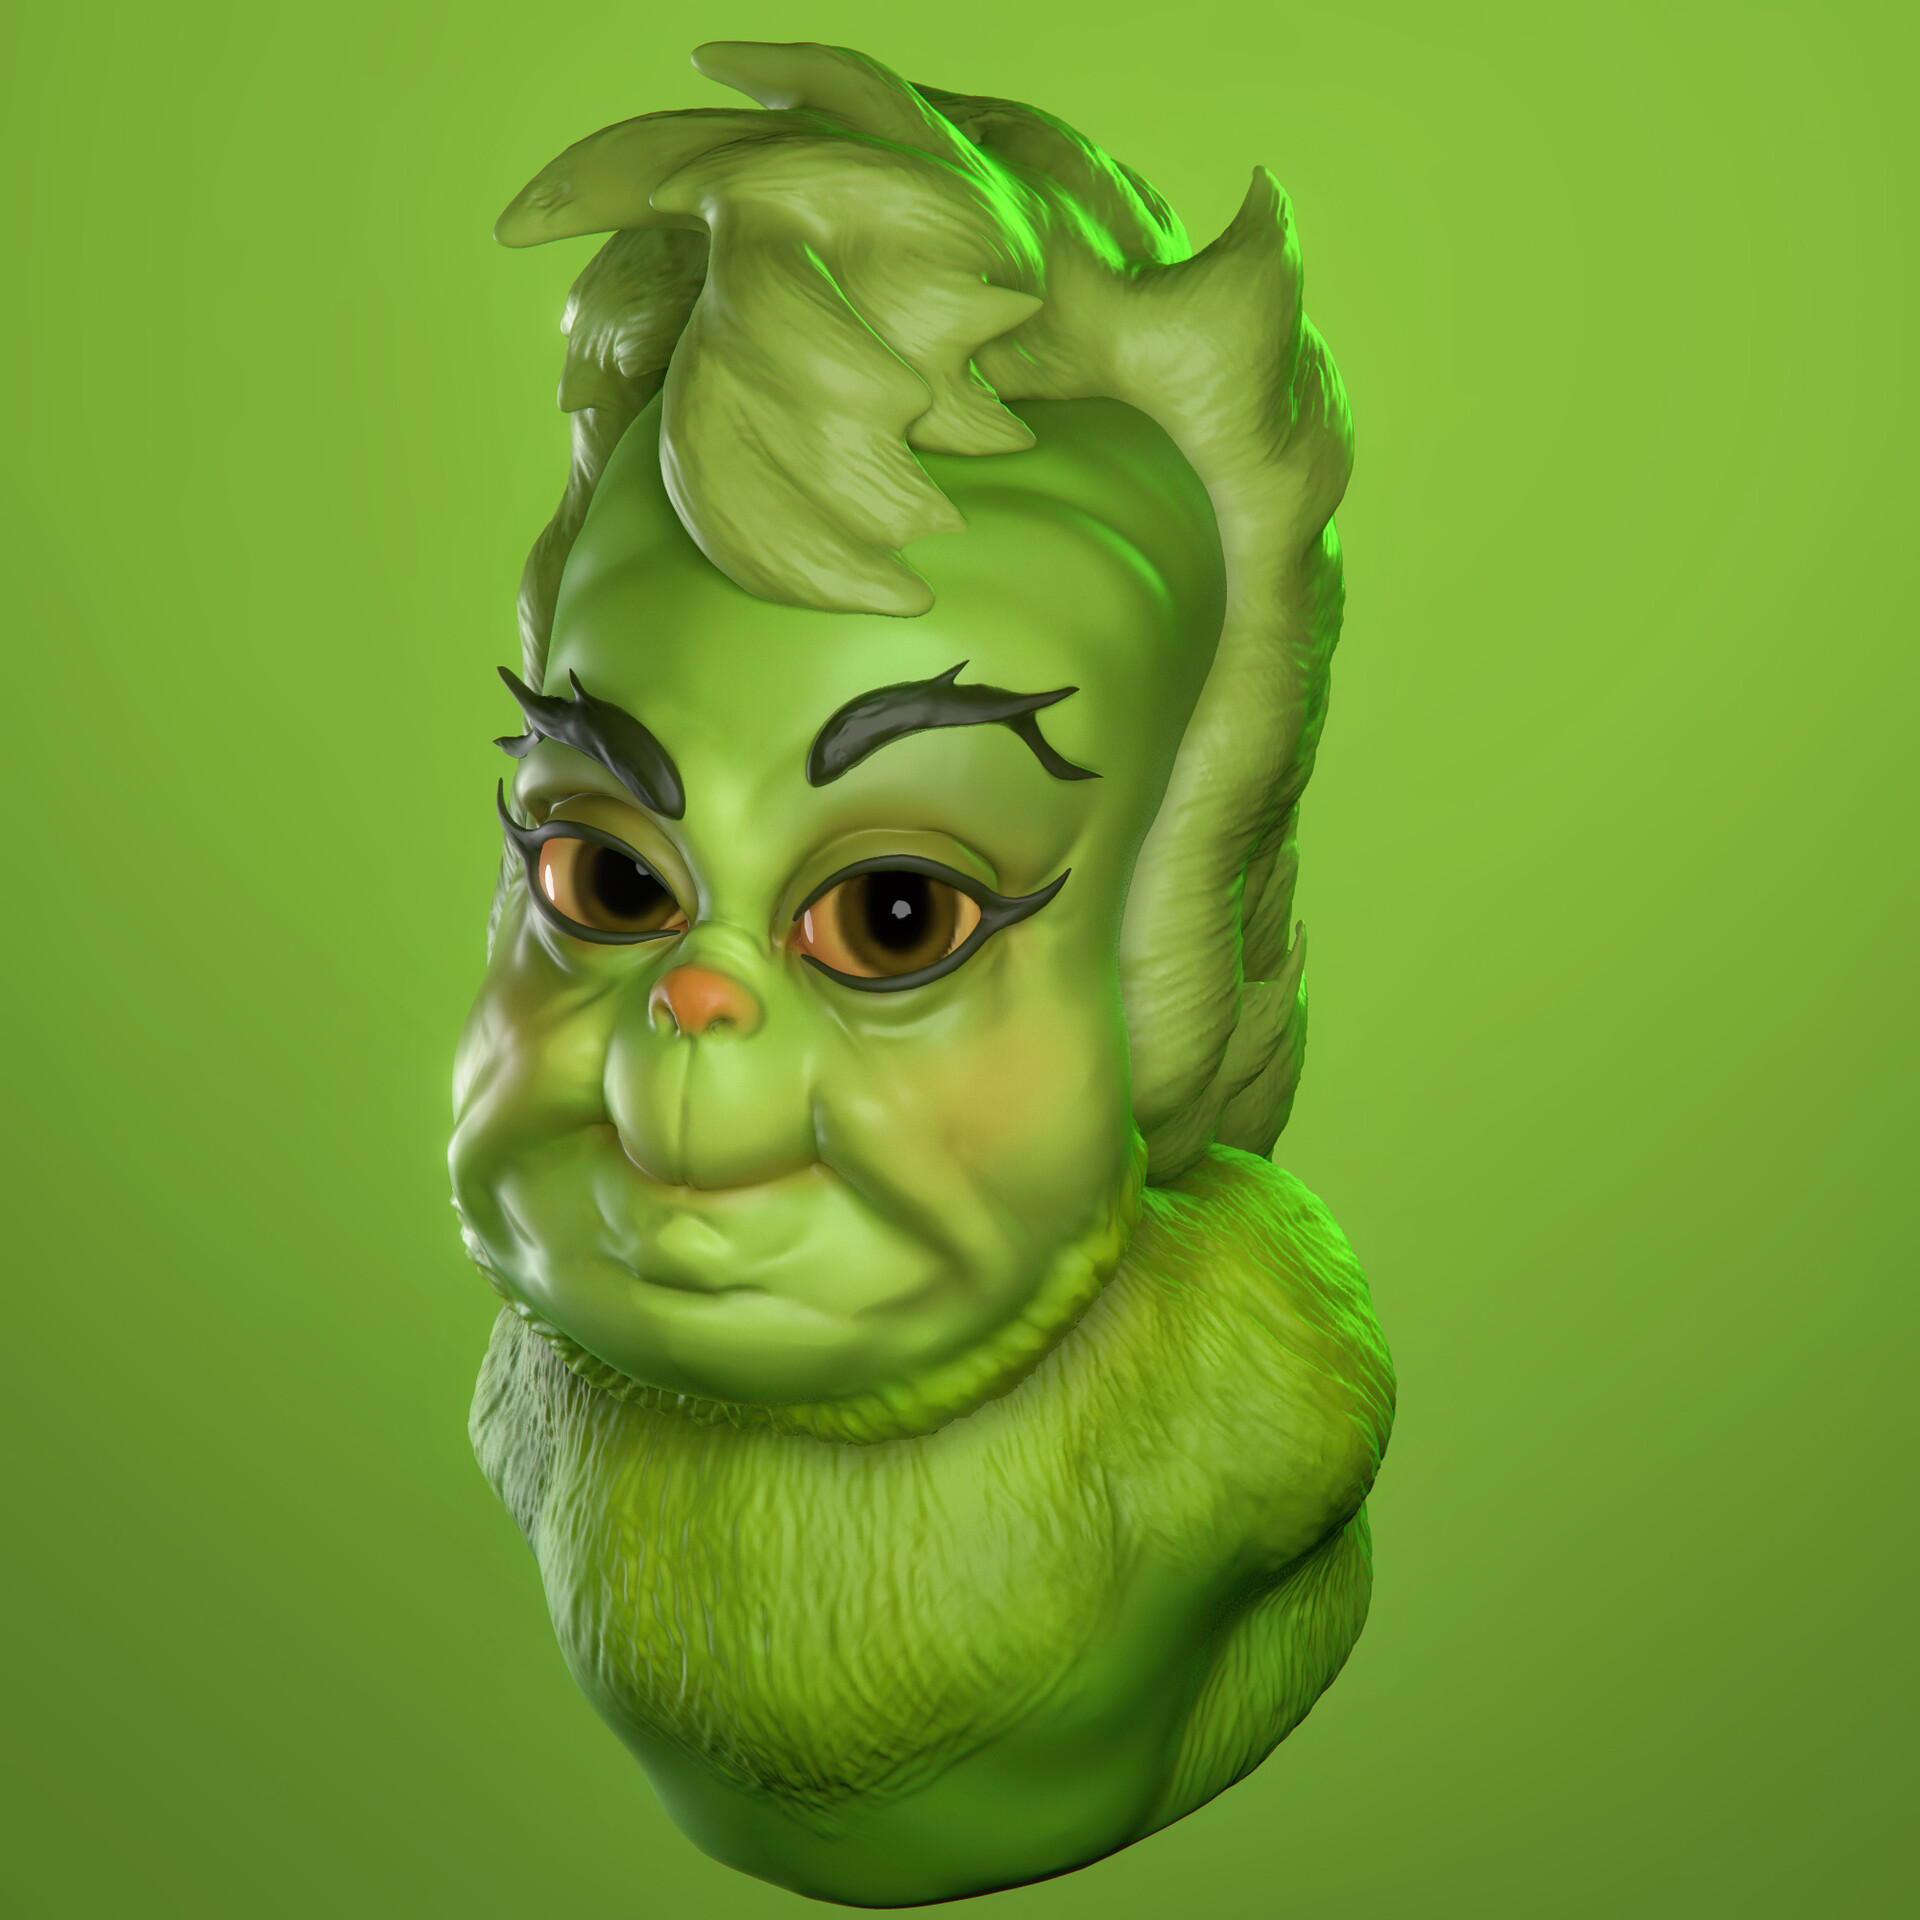 Bany Grinch Wallpapers